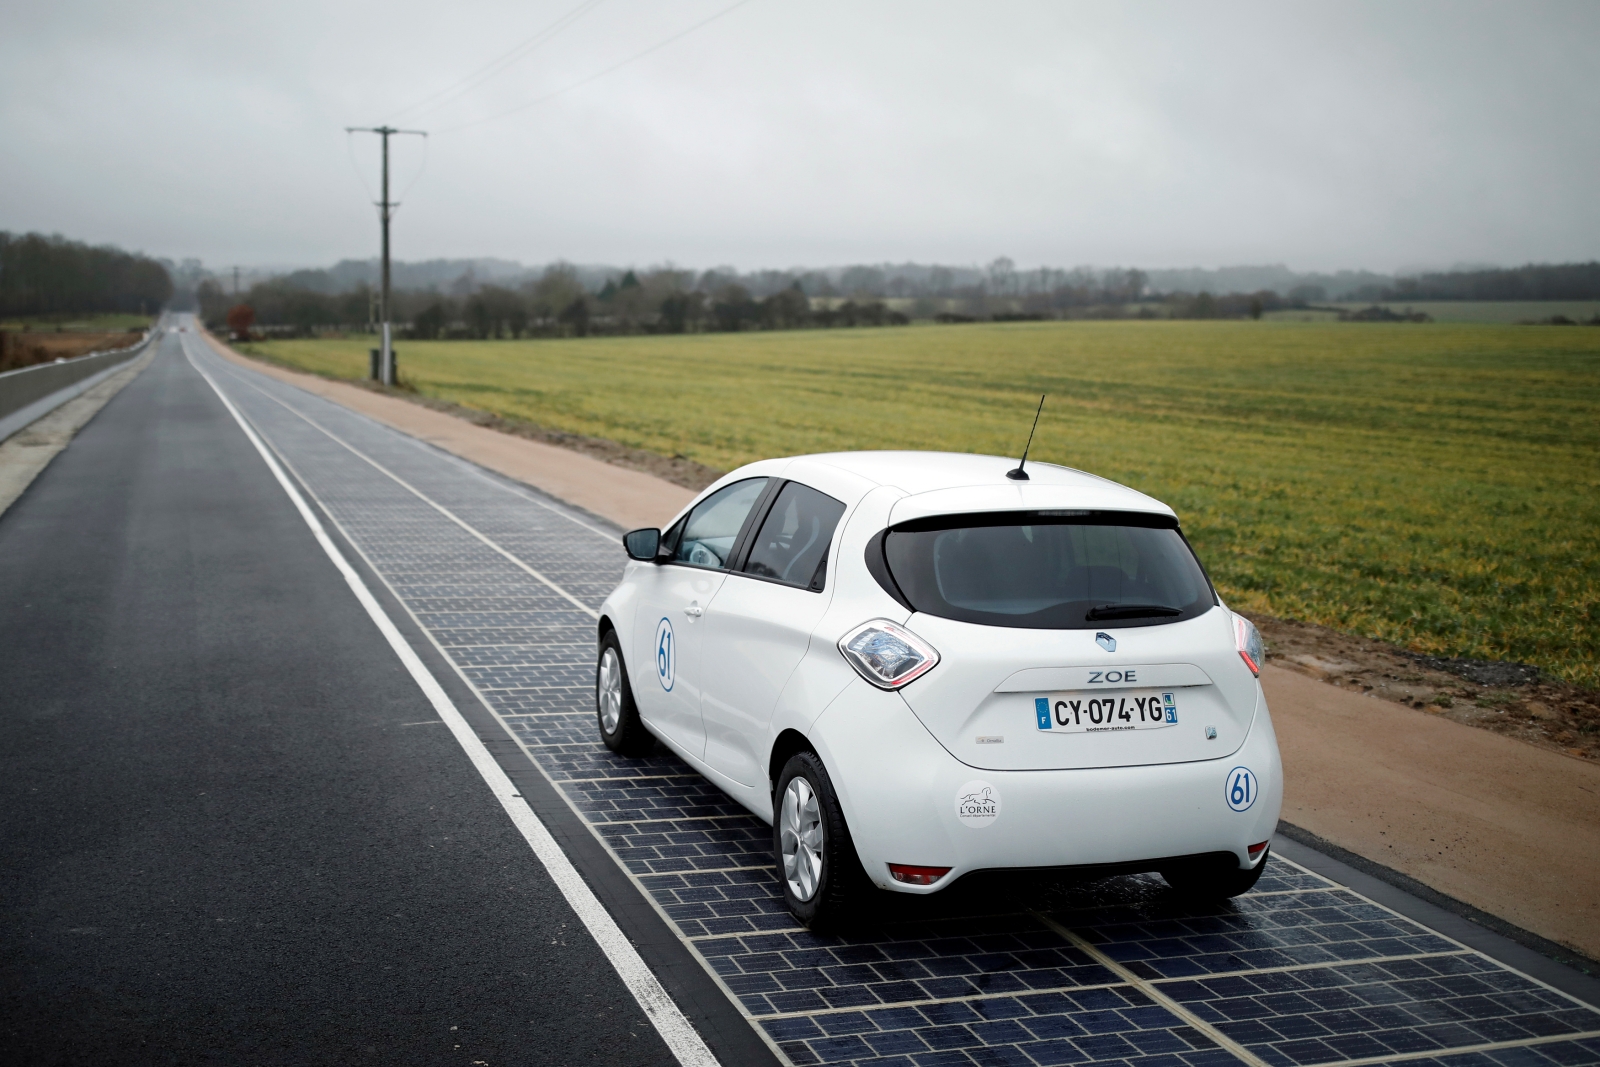 The world’s first Solar Panel Road has opened in the small French town, Tourouvre-au-Perche. 